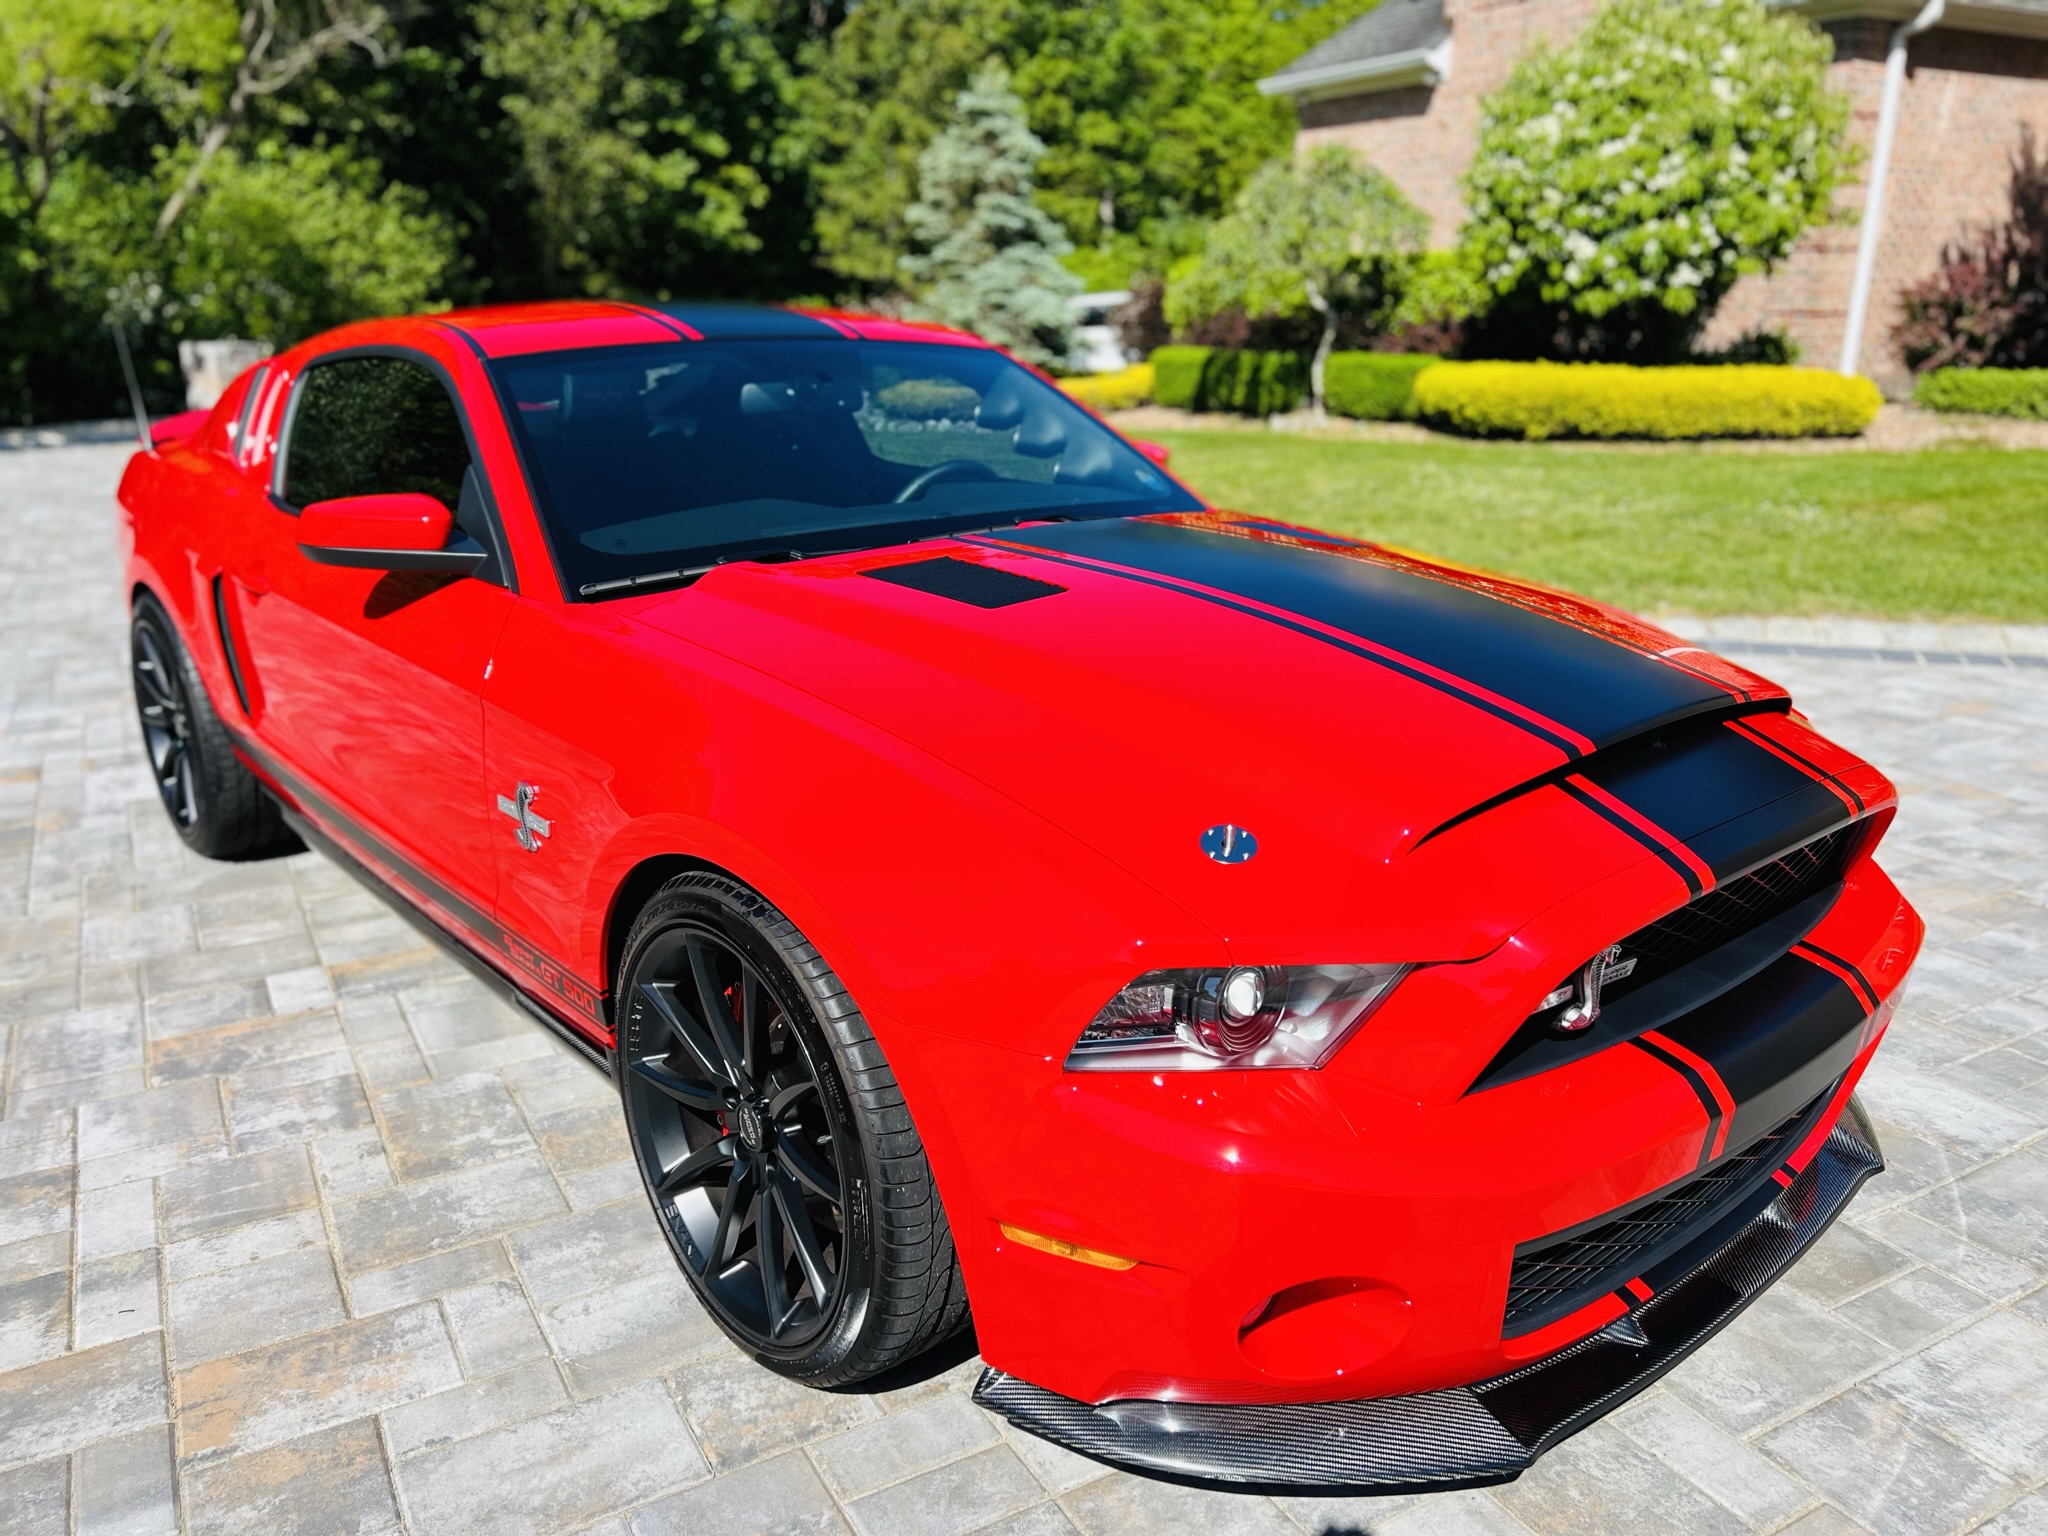 Used Ford Mustang Shelby GT500 for Sale Right Now - Autotrader